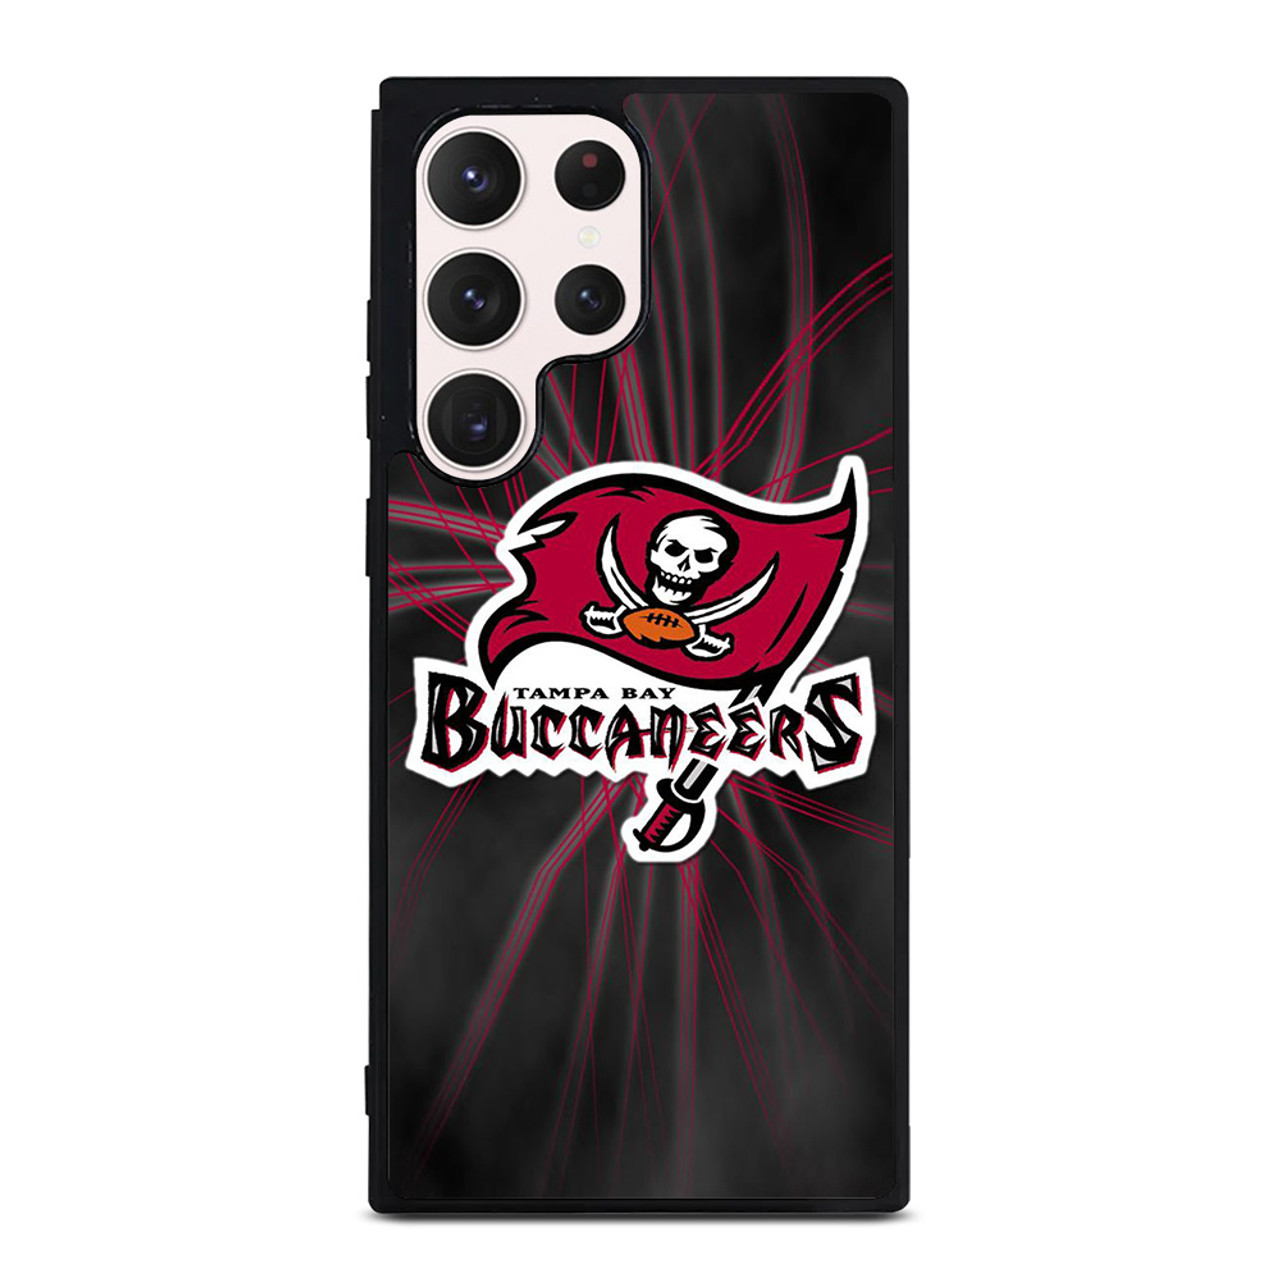 Tampa Bay Buccaneers Super Bowl LV Champions Hard-shell Phone Case - Samsung